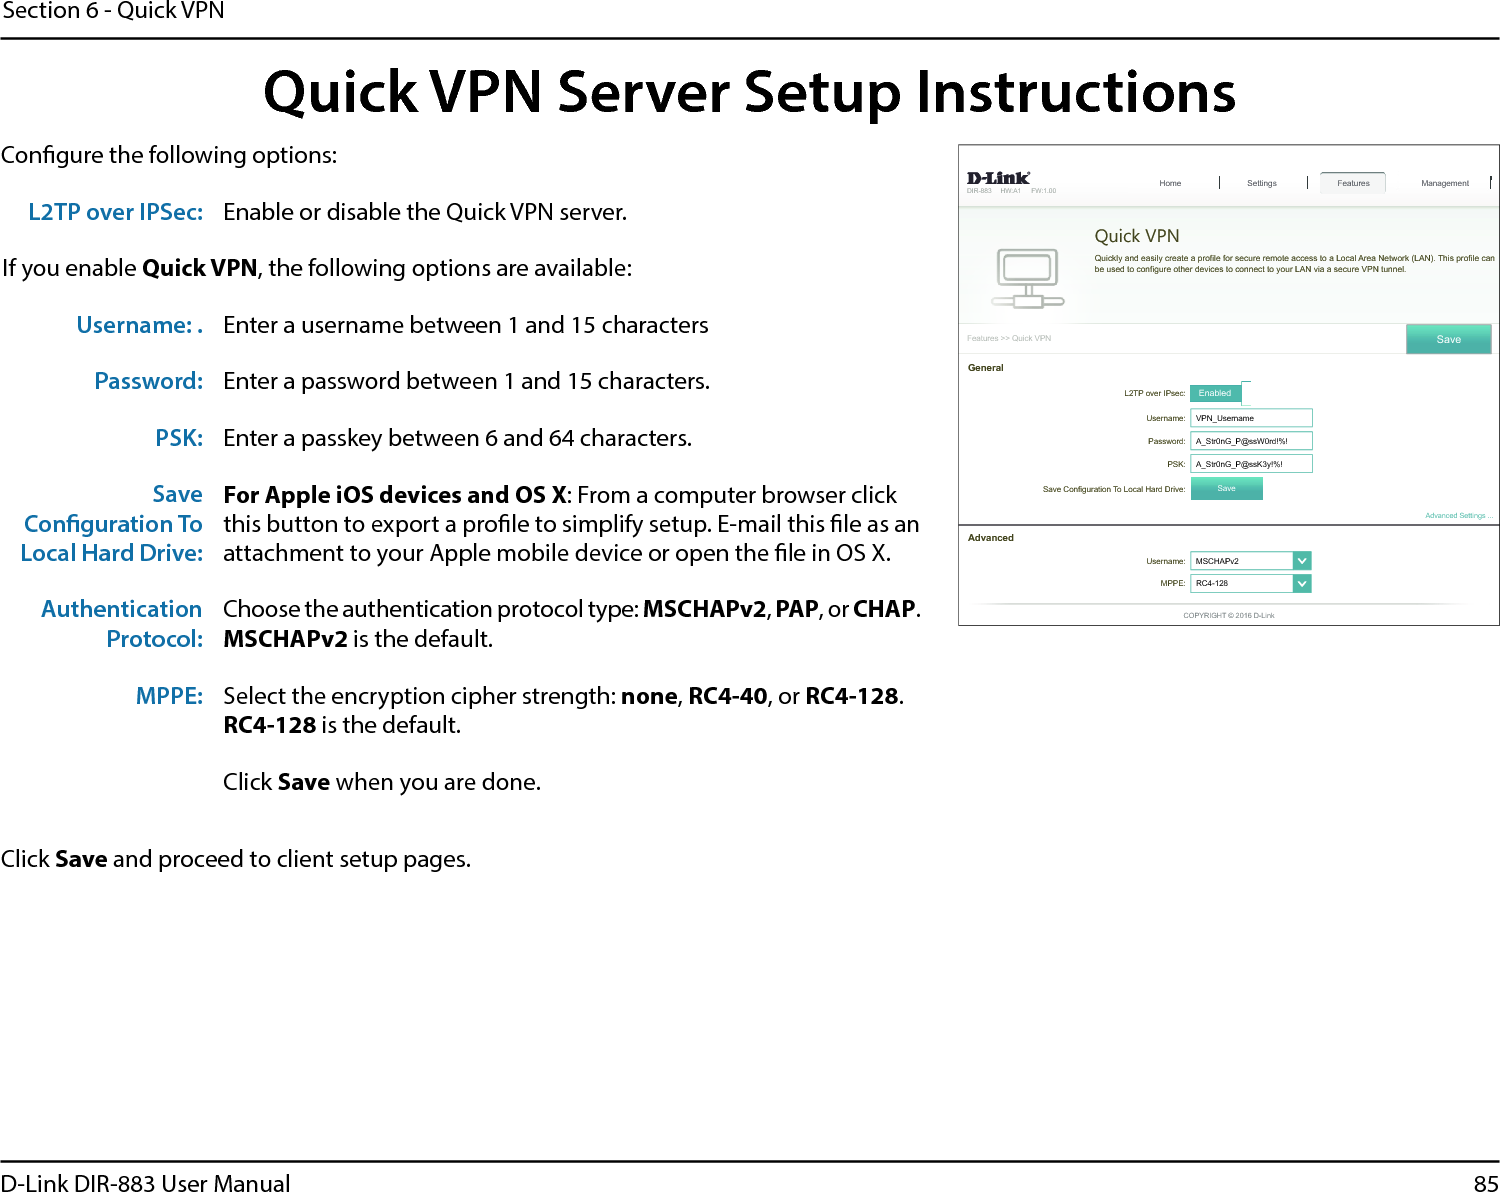 85D-Link DIR-883 User ManualSection 6 - Quick VPNQuick VPN Server Setup InstructionsCongure the following options:Click Save and proceed to client setup pages.&apos;,5 +:$ ):)HDWXUHV!!4XLFN931Quick VPN4XLFNO\DQGHDVLO\FUHDWHDSUR¿OHIRUVHFXUHUHPRWHDFFHVVWRD/RFDO$UHD1HWZRUN/$17KLVSUR¿OHFDQEHXVHGWRFRQ¿JXUHRWKHUGHYLFHVWRFRQQHFWWR\RXU/$1YLDDVHFXUH931WXQQHO6HWWLQJV Features+RPH Management6DYH/73RYHU,3VHF EnabledUsername: 931B8VHUQDPHPassword: $B6WUQ*B3#VV:UG36. $B6WUQ*B3#VV.\6DYH&amp;RQ¿JXUDWLRQ7R/RFDO+DUG&apos;ULYH 6DYHGeneralUsername: 06&amp;+$3Y໹MPPE: 5&amp;໹$GYDQFHG$GYDQFHG6HWWLQJV&amp;23&lt;5,*+7&apos;/LQNL2TP over IPSec: Enable or disable the Quick VPN server.If you enable Quick VPN, the following options are available:Username: . Enter a username between 1 and 15 charactersPassword: Enter a password between 1 and 15 characters.PSK: Enter a passkey between 6 and 64 characters.SaveConguration ToLocal Hard Drive:For Apple iOS devices and OS X: From a computer browser clickthis button to export a prole to simplify setup. E-mail this le as anattachment to your Apple mobile device or open the le in OS X.AuthenticationProtocol:Choose the authentication protocol type: MSCHAPv2, PAP, or CHAP.MSCHAPv2 is the default.MPPE: Select the encryption cipher strength: none,RC4-40, or RC4-128.RC4-128 is the default.Click Save when you are done.